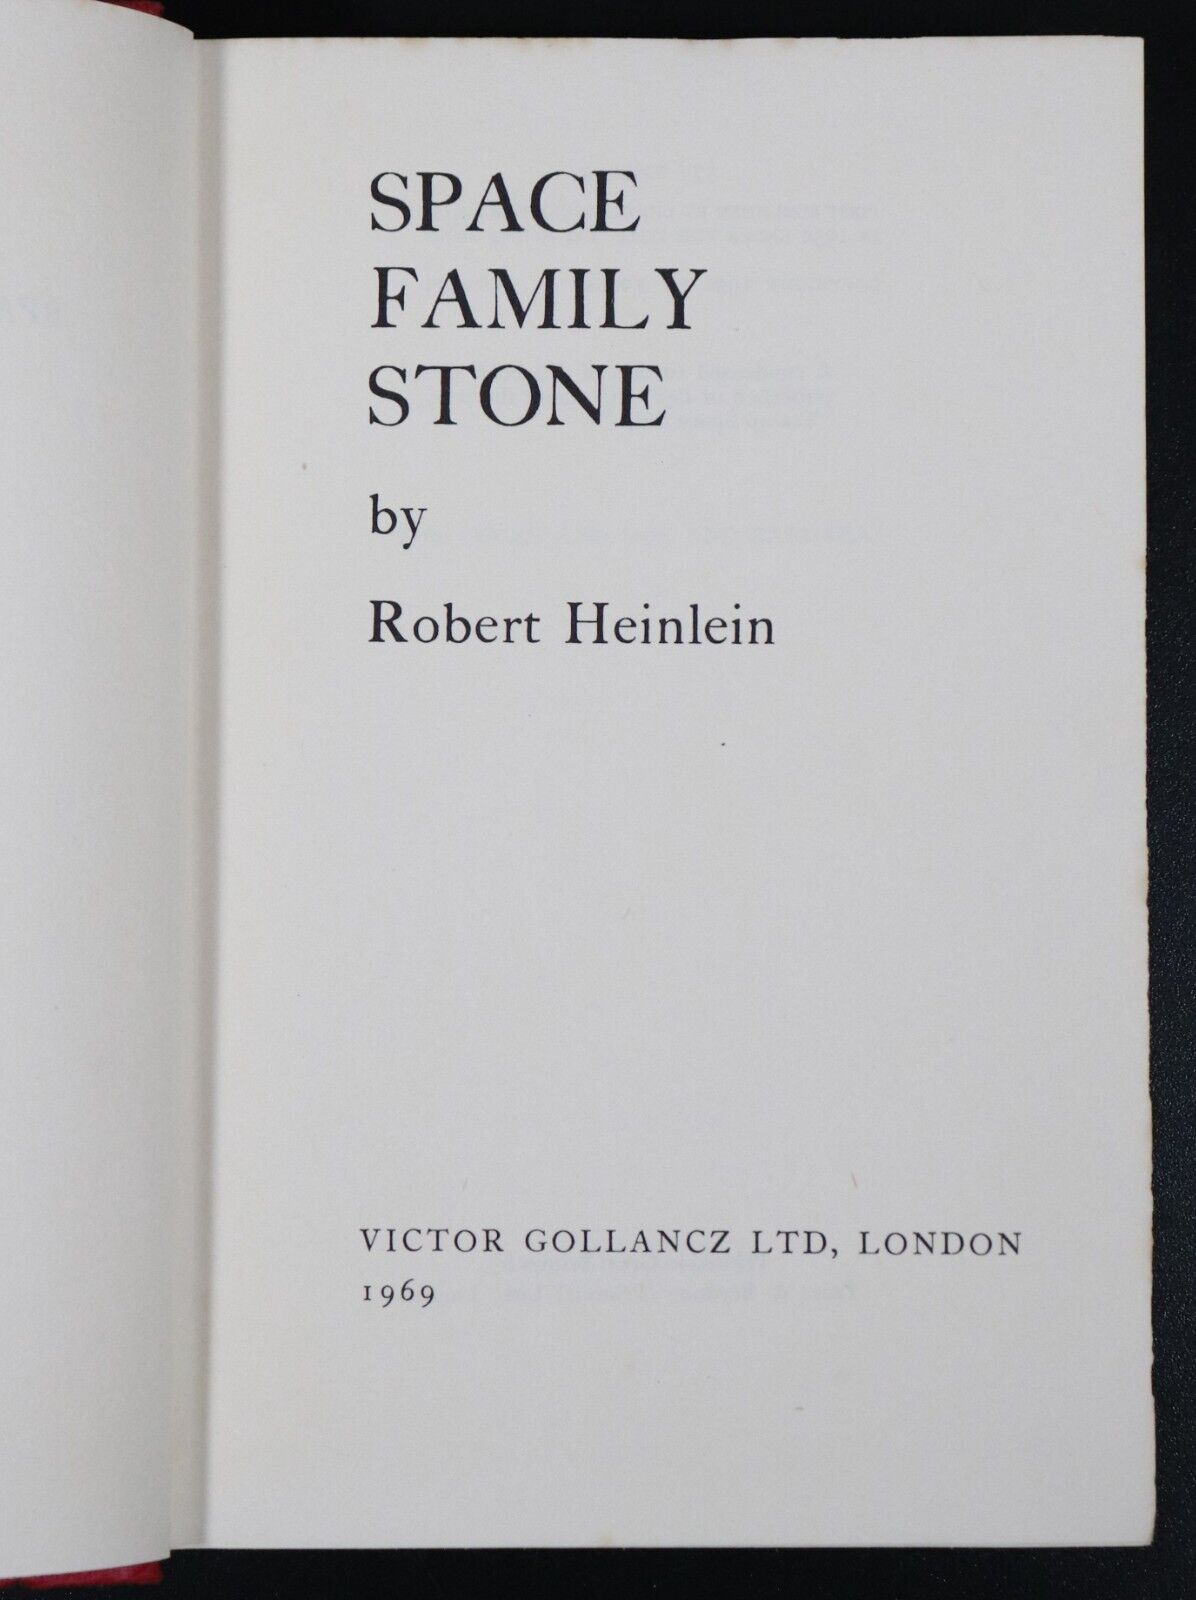 1969 Space Family Stone by RA Heinlein Vintage Science Fiction Book 1st UK Ed